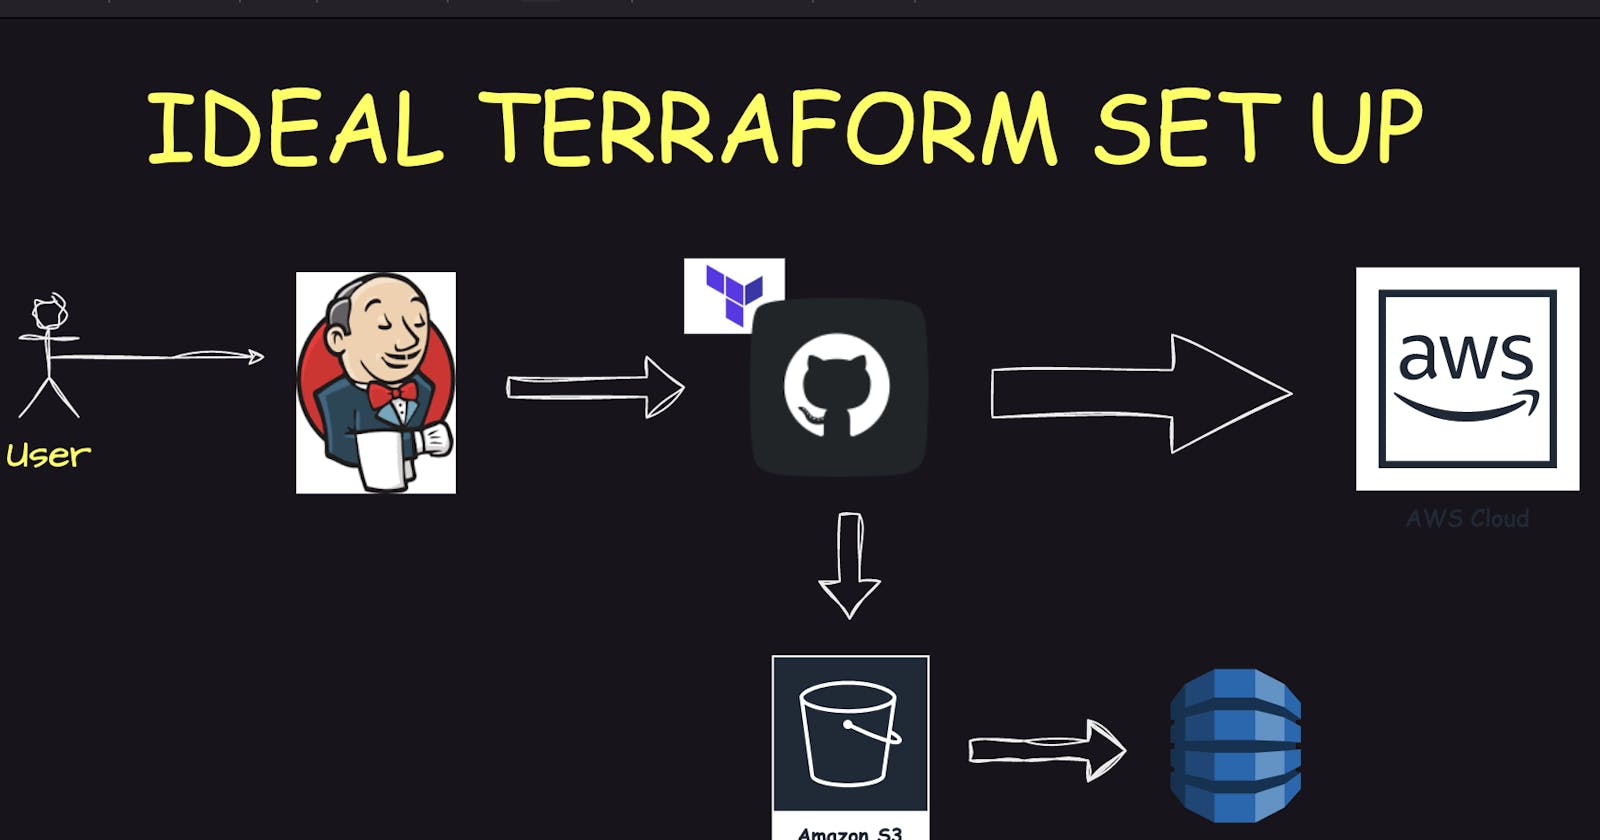 How to Set Up a Remote Backend for Terraform State File with Amazon S3